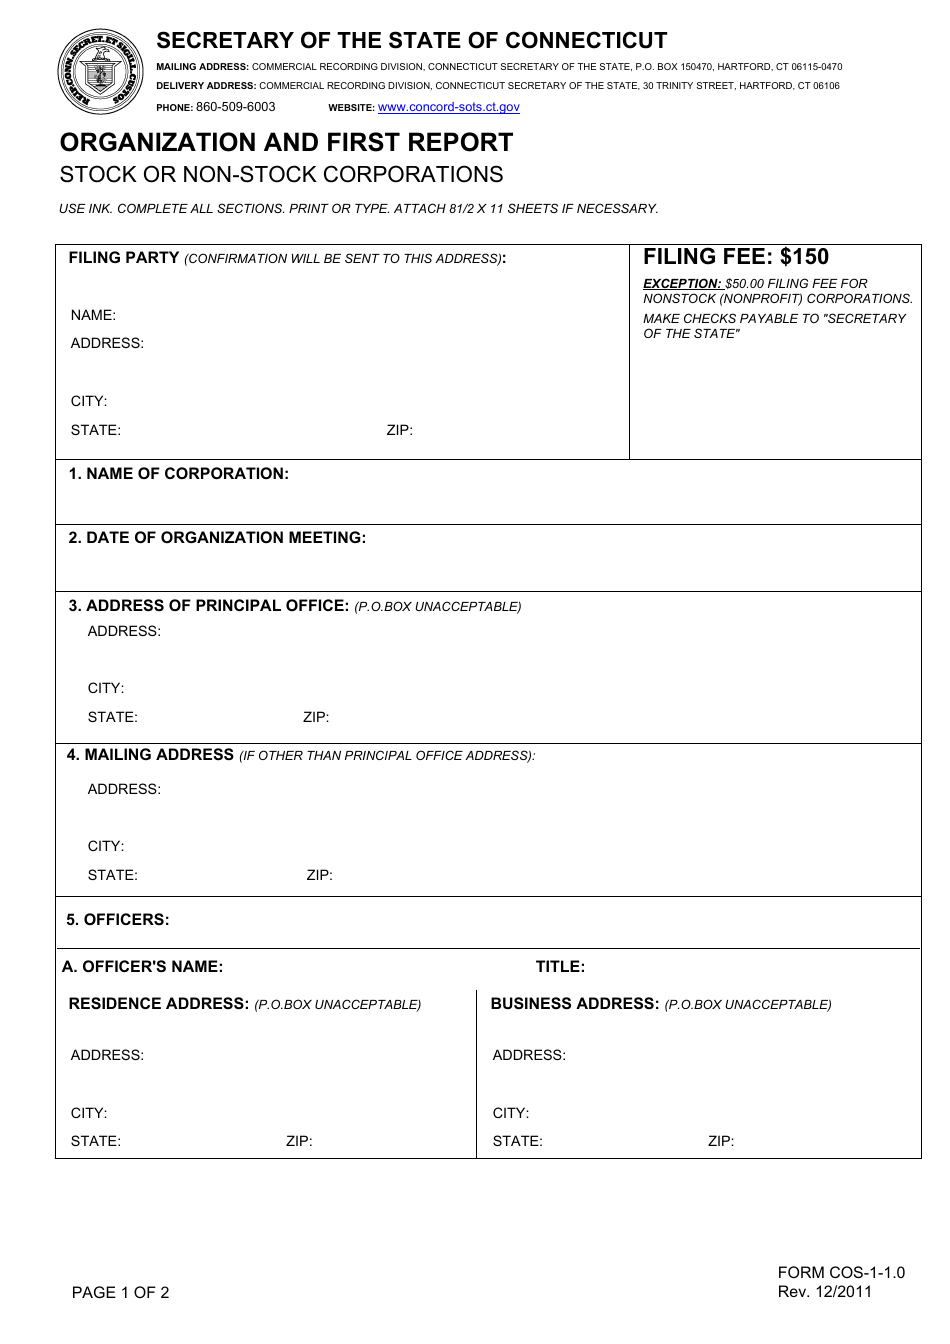 Form COS-1-1.0 Organization and First Report - Stock or Non-stock Corporations - Connecticut, Page 1